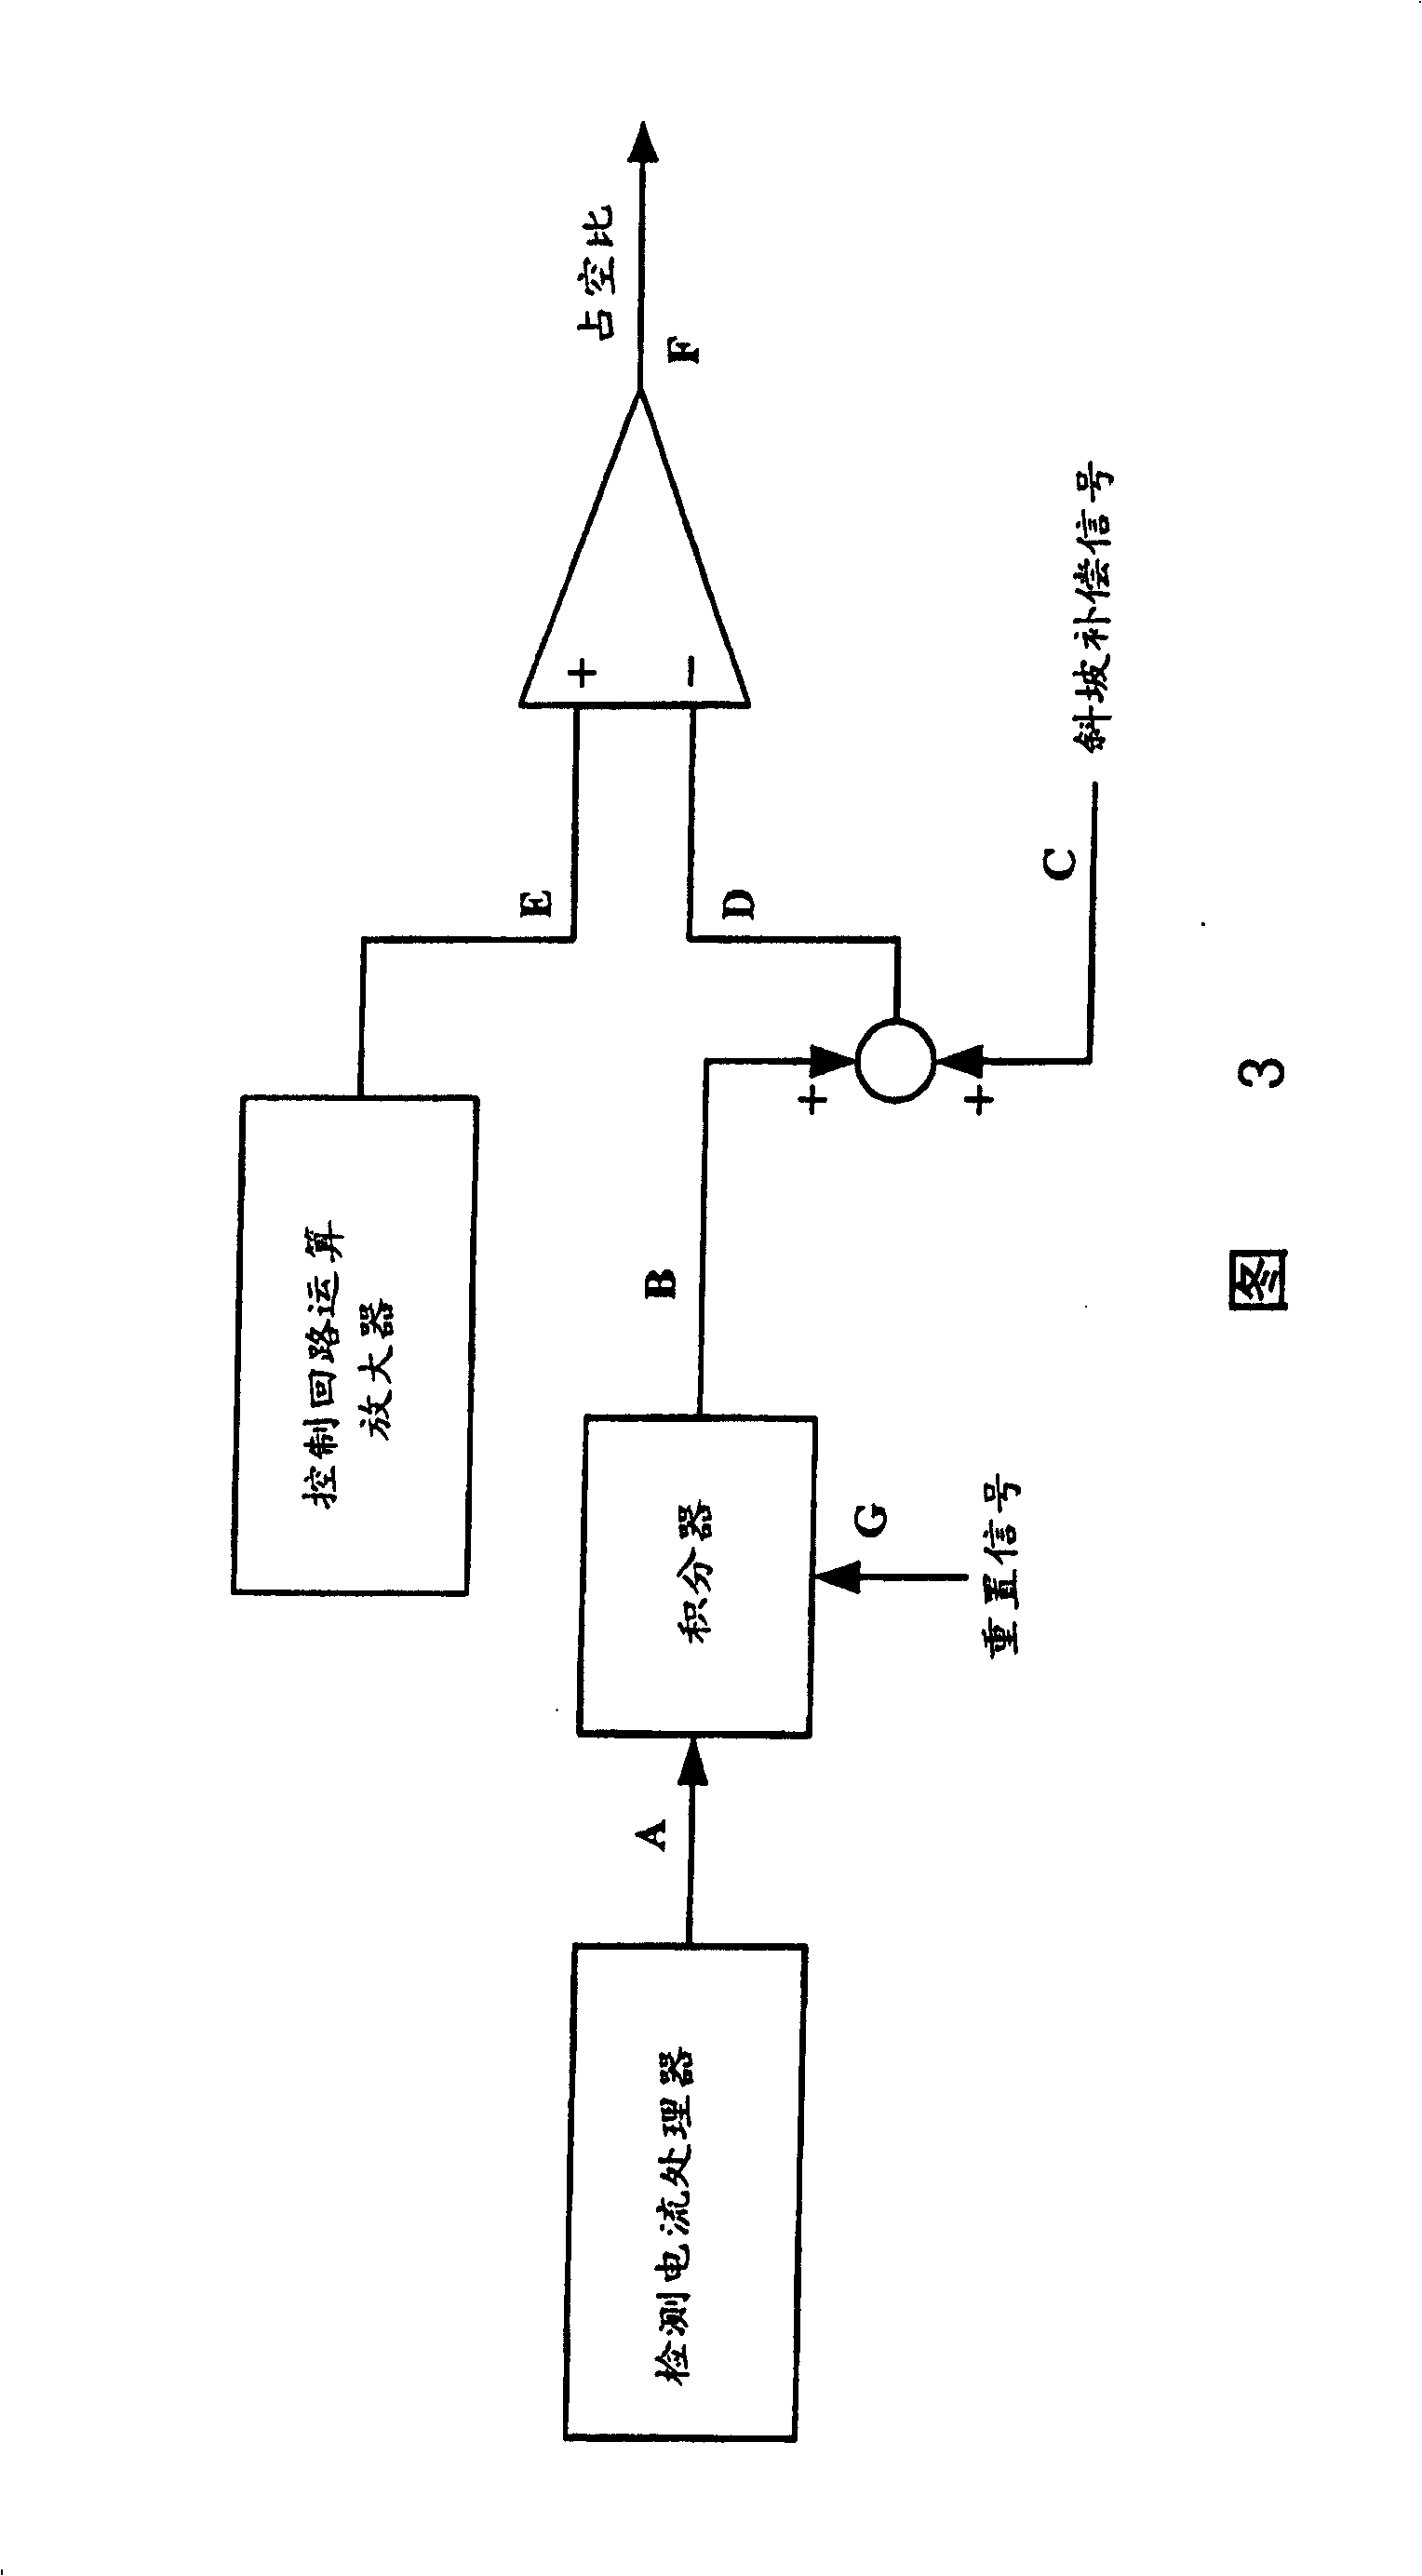 Method and controller for inhibiting transformer dc magnetic bias